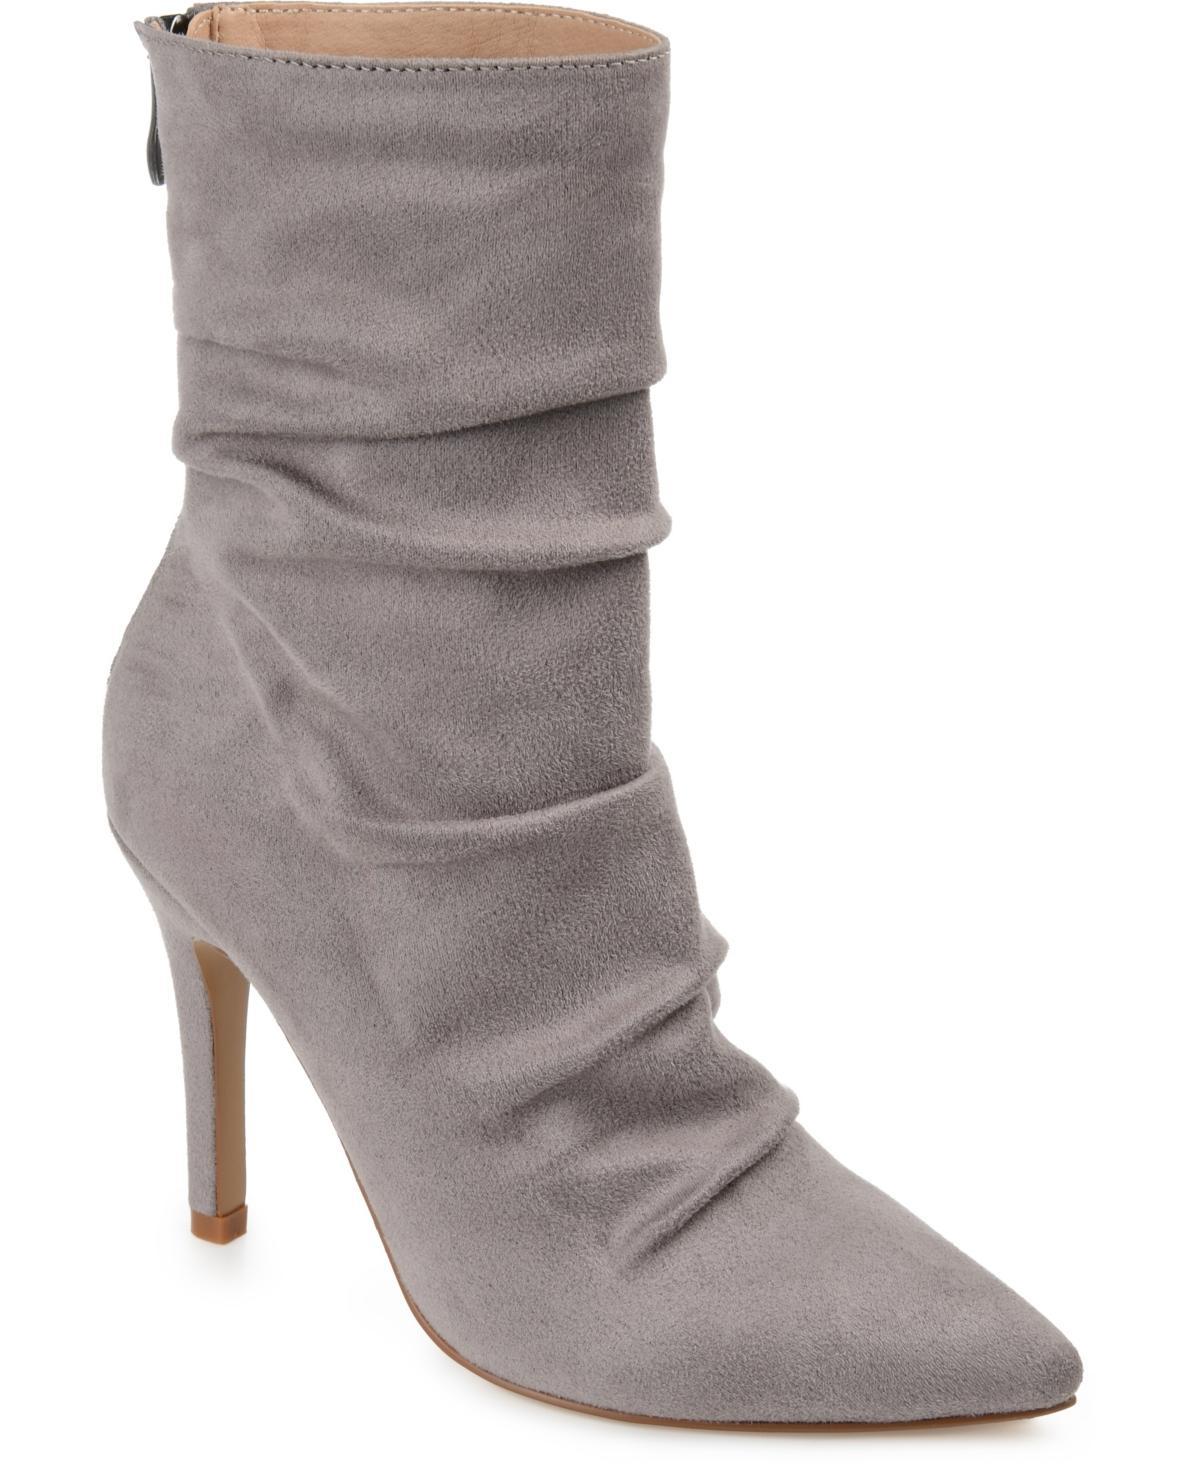 Journee Collection Markie Womens High Heel Ankle Boots Grey Product Image